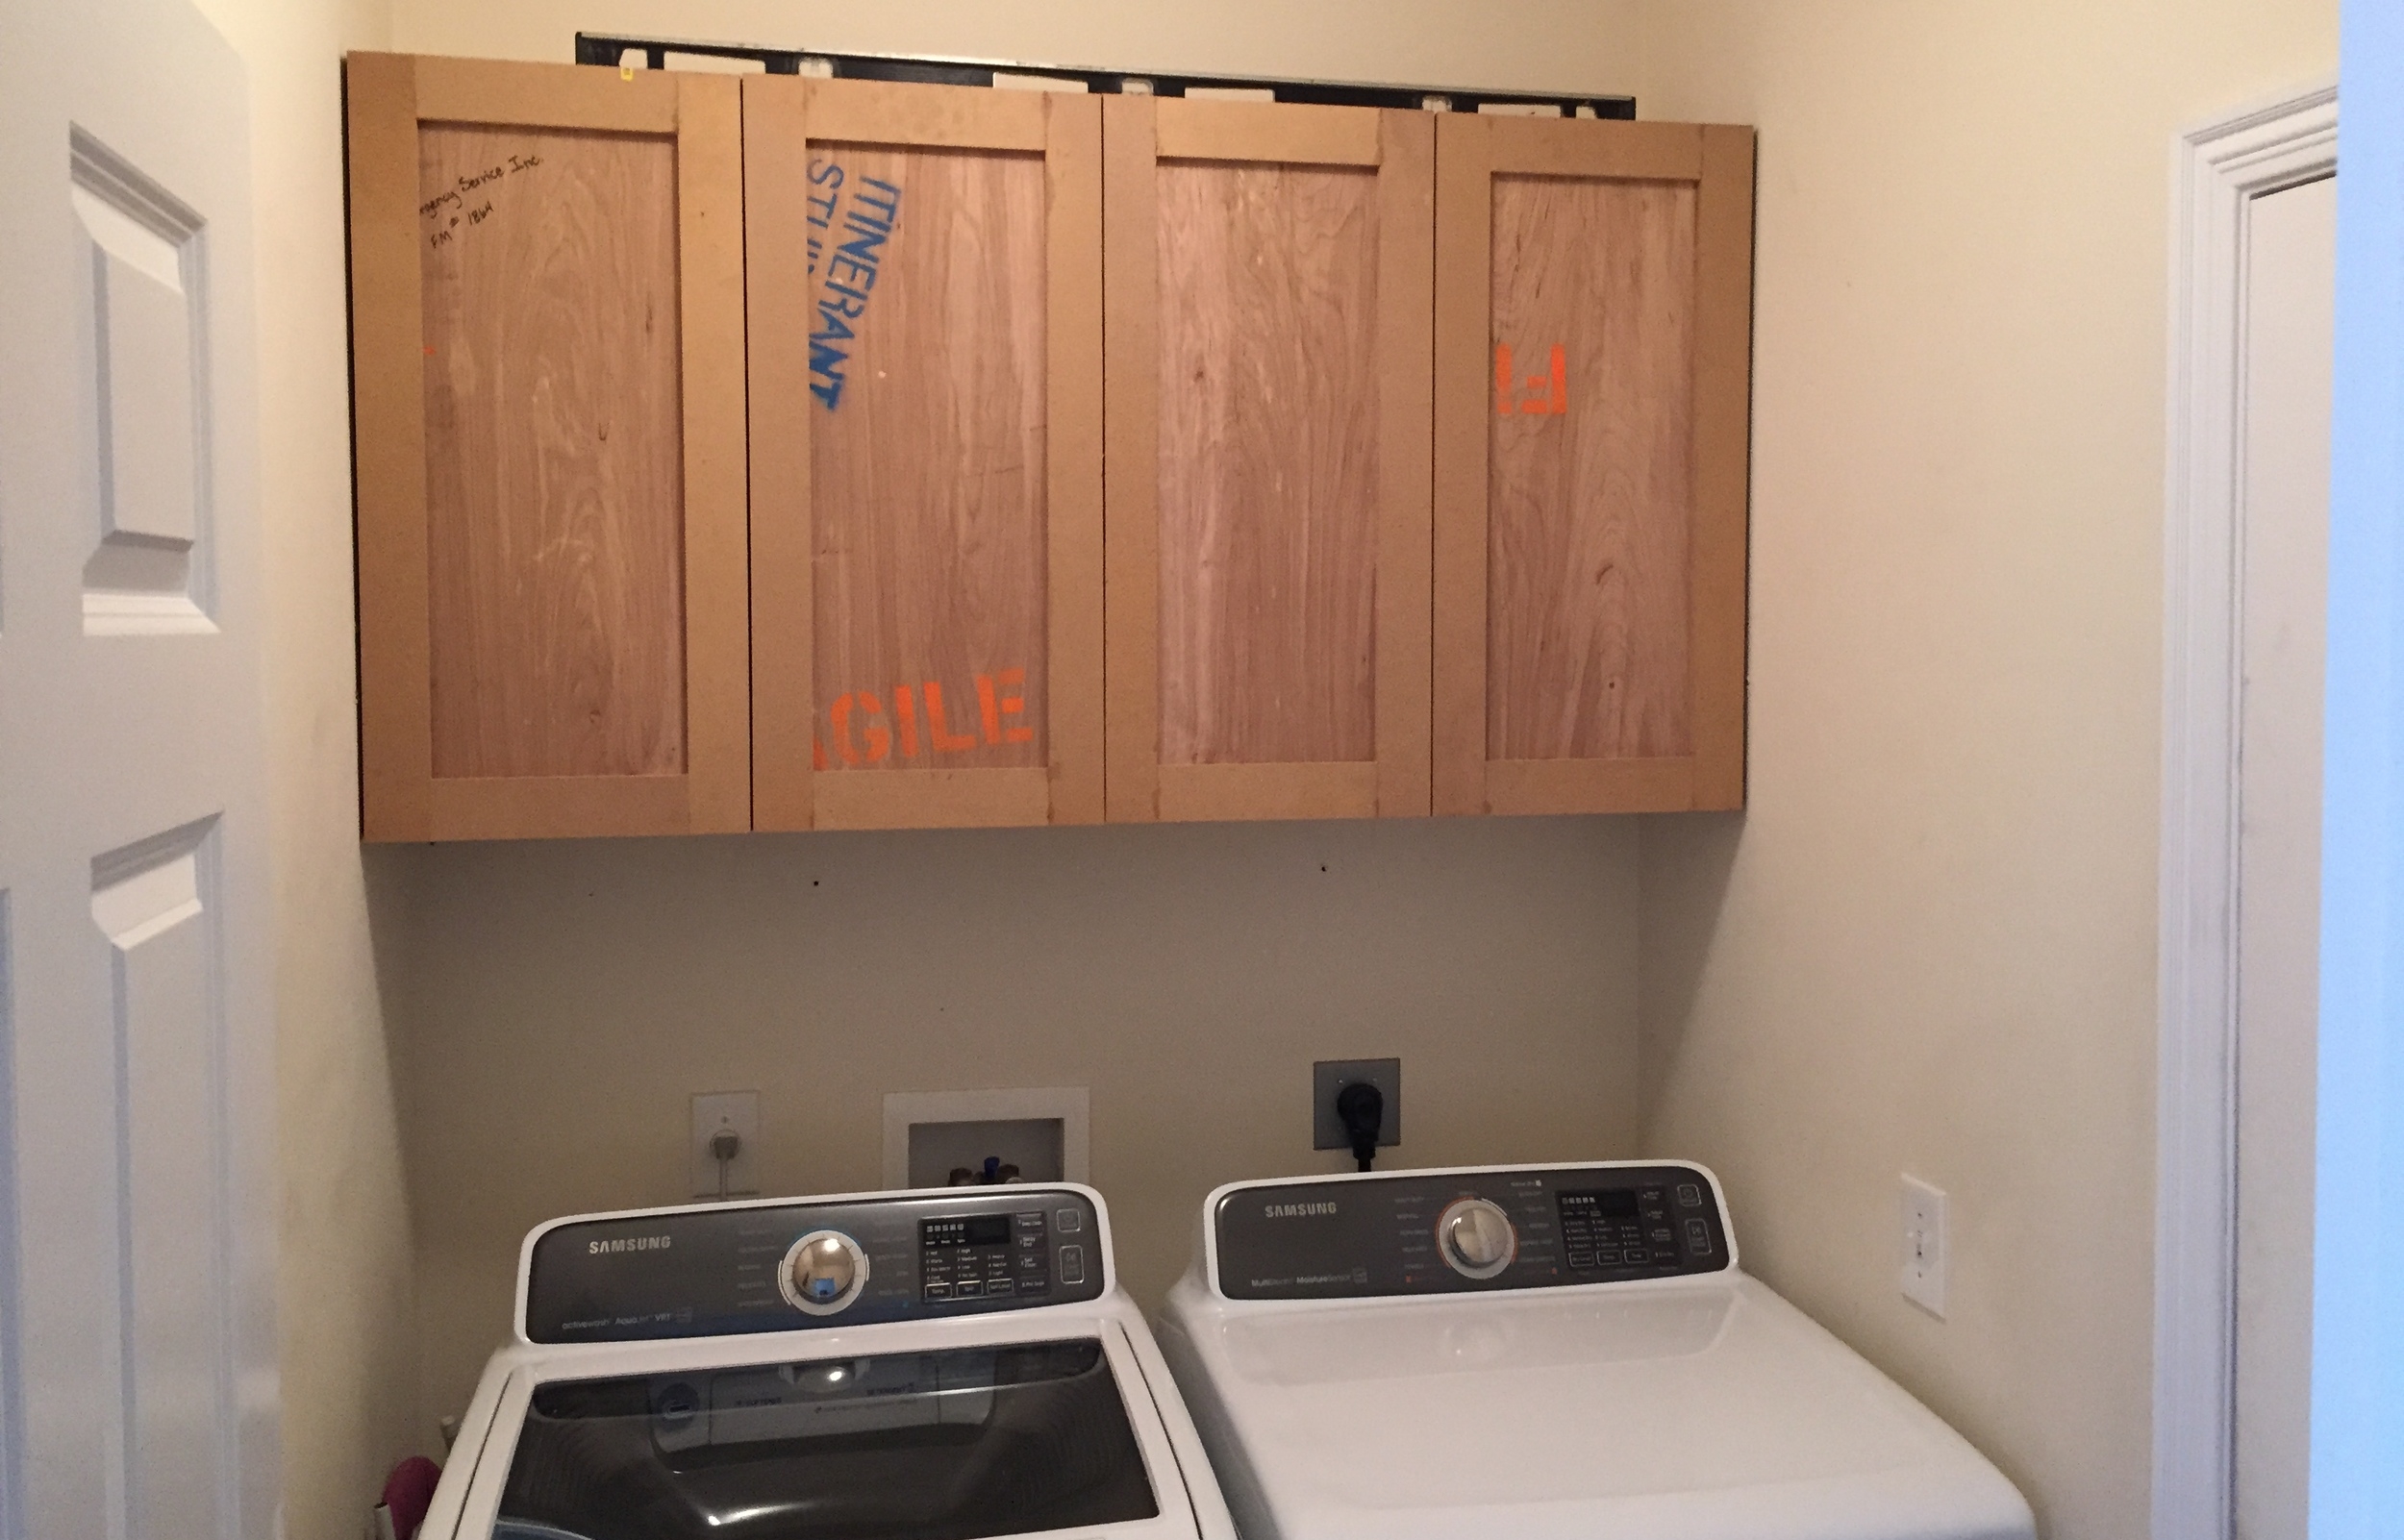 Upper Cabinets Laundry Room Makeover, Diy Laundry Room Cabinets Plans